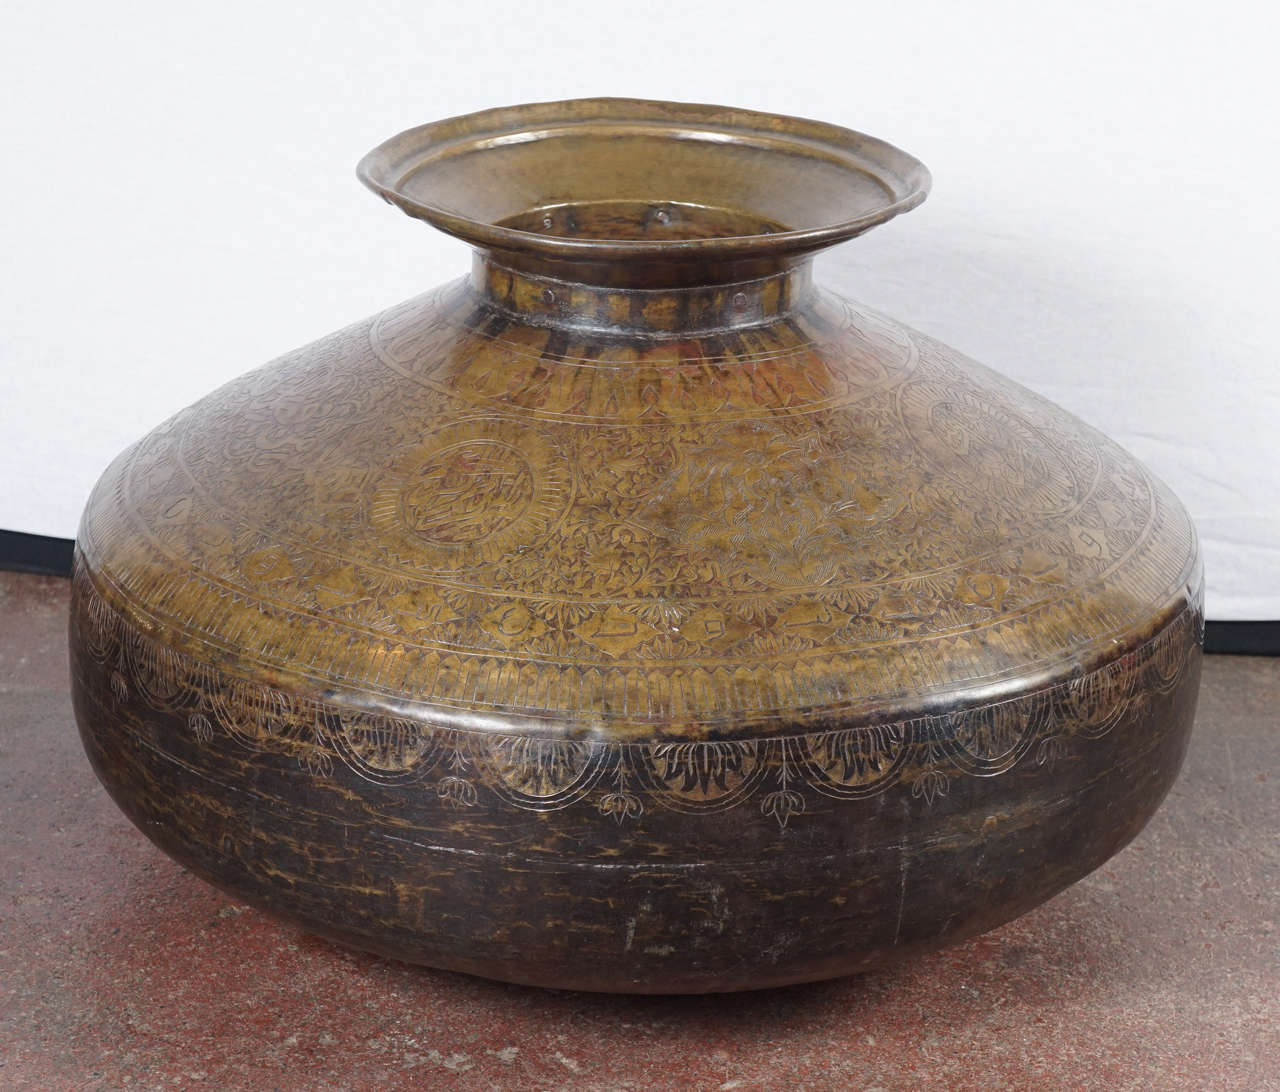 Delicate Sanskrit etching adorns this curvaceously hand-forged pot from Northern India.